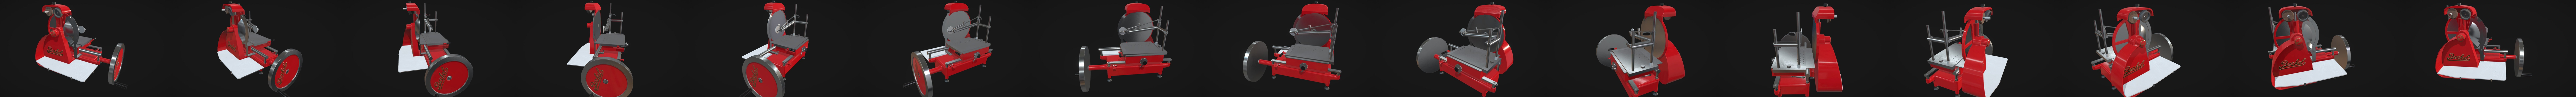 2,145 Meat Slicer Images, Stock Photos, 3D objects, & Vectors